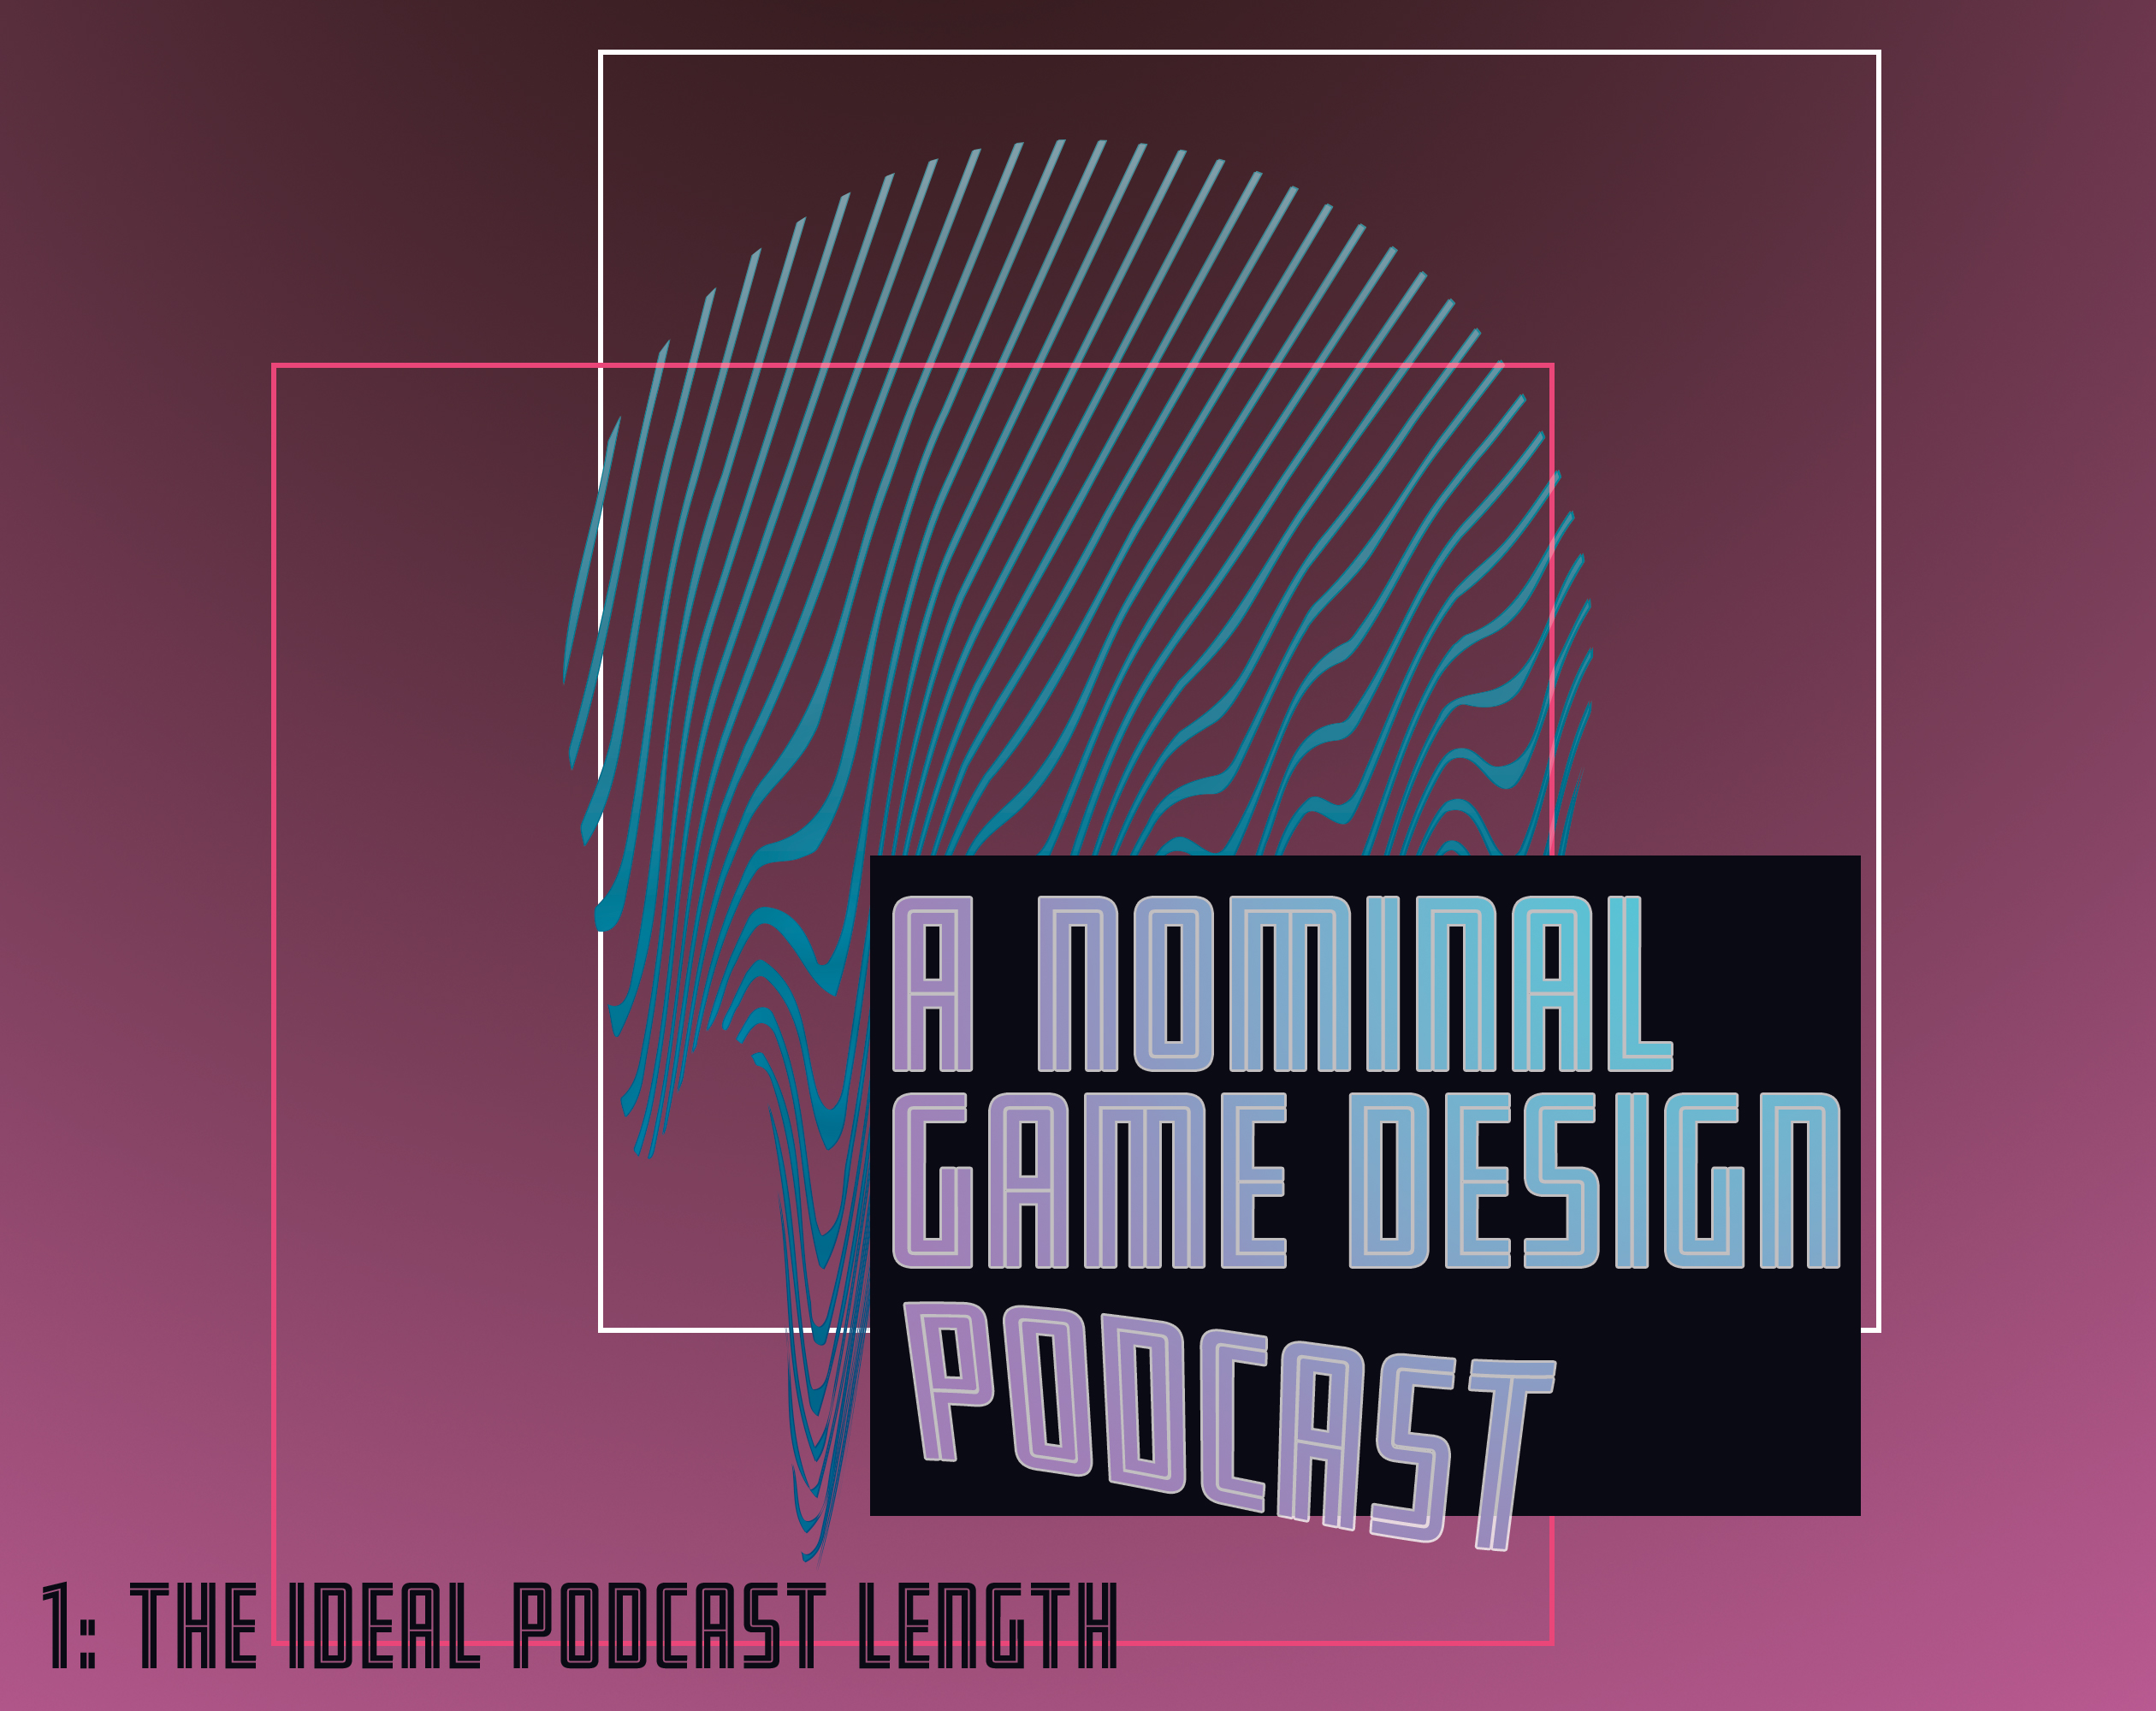 A Nominal Game Design Podcast 1 - The Ideal Podcast Length